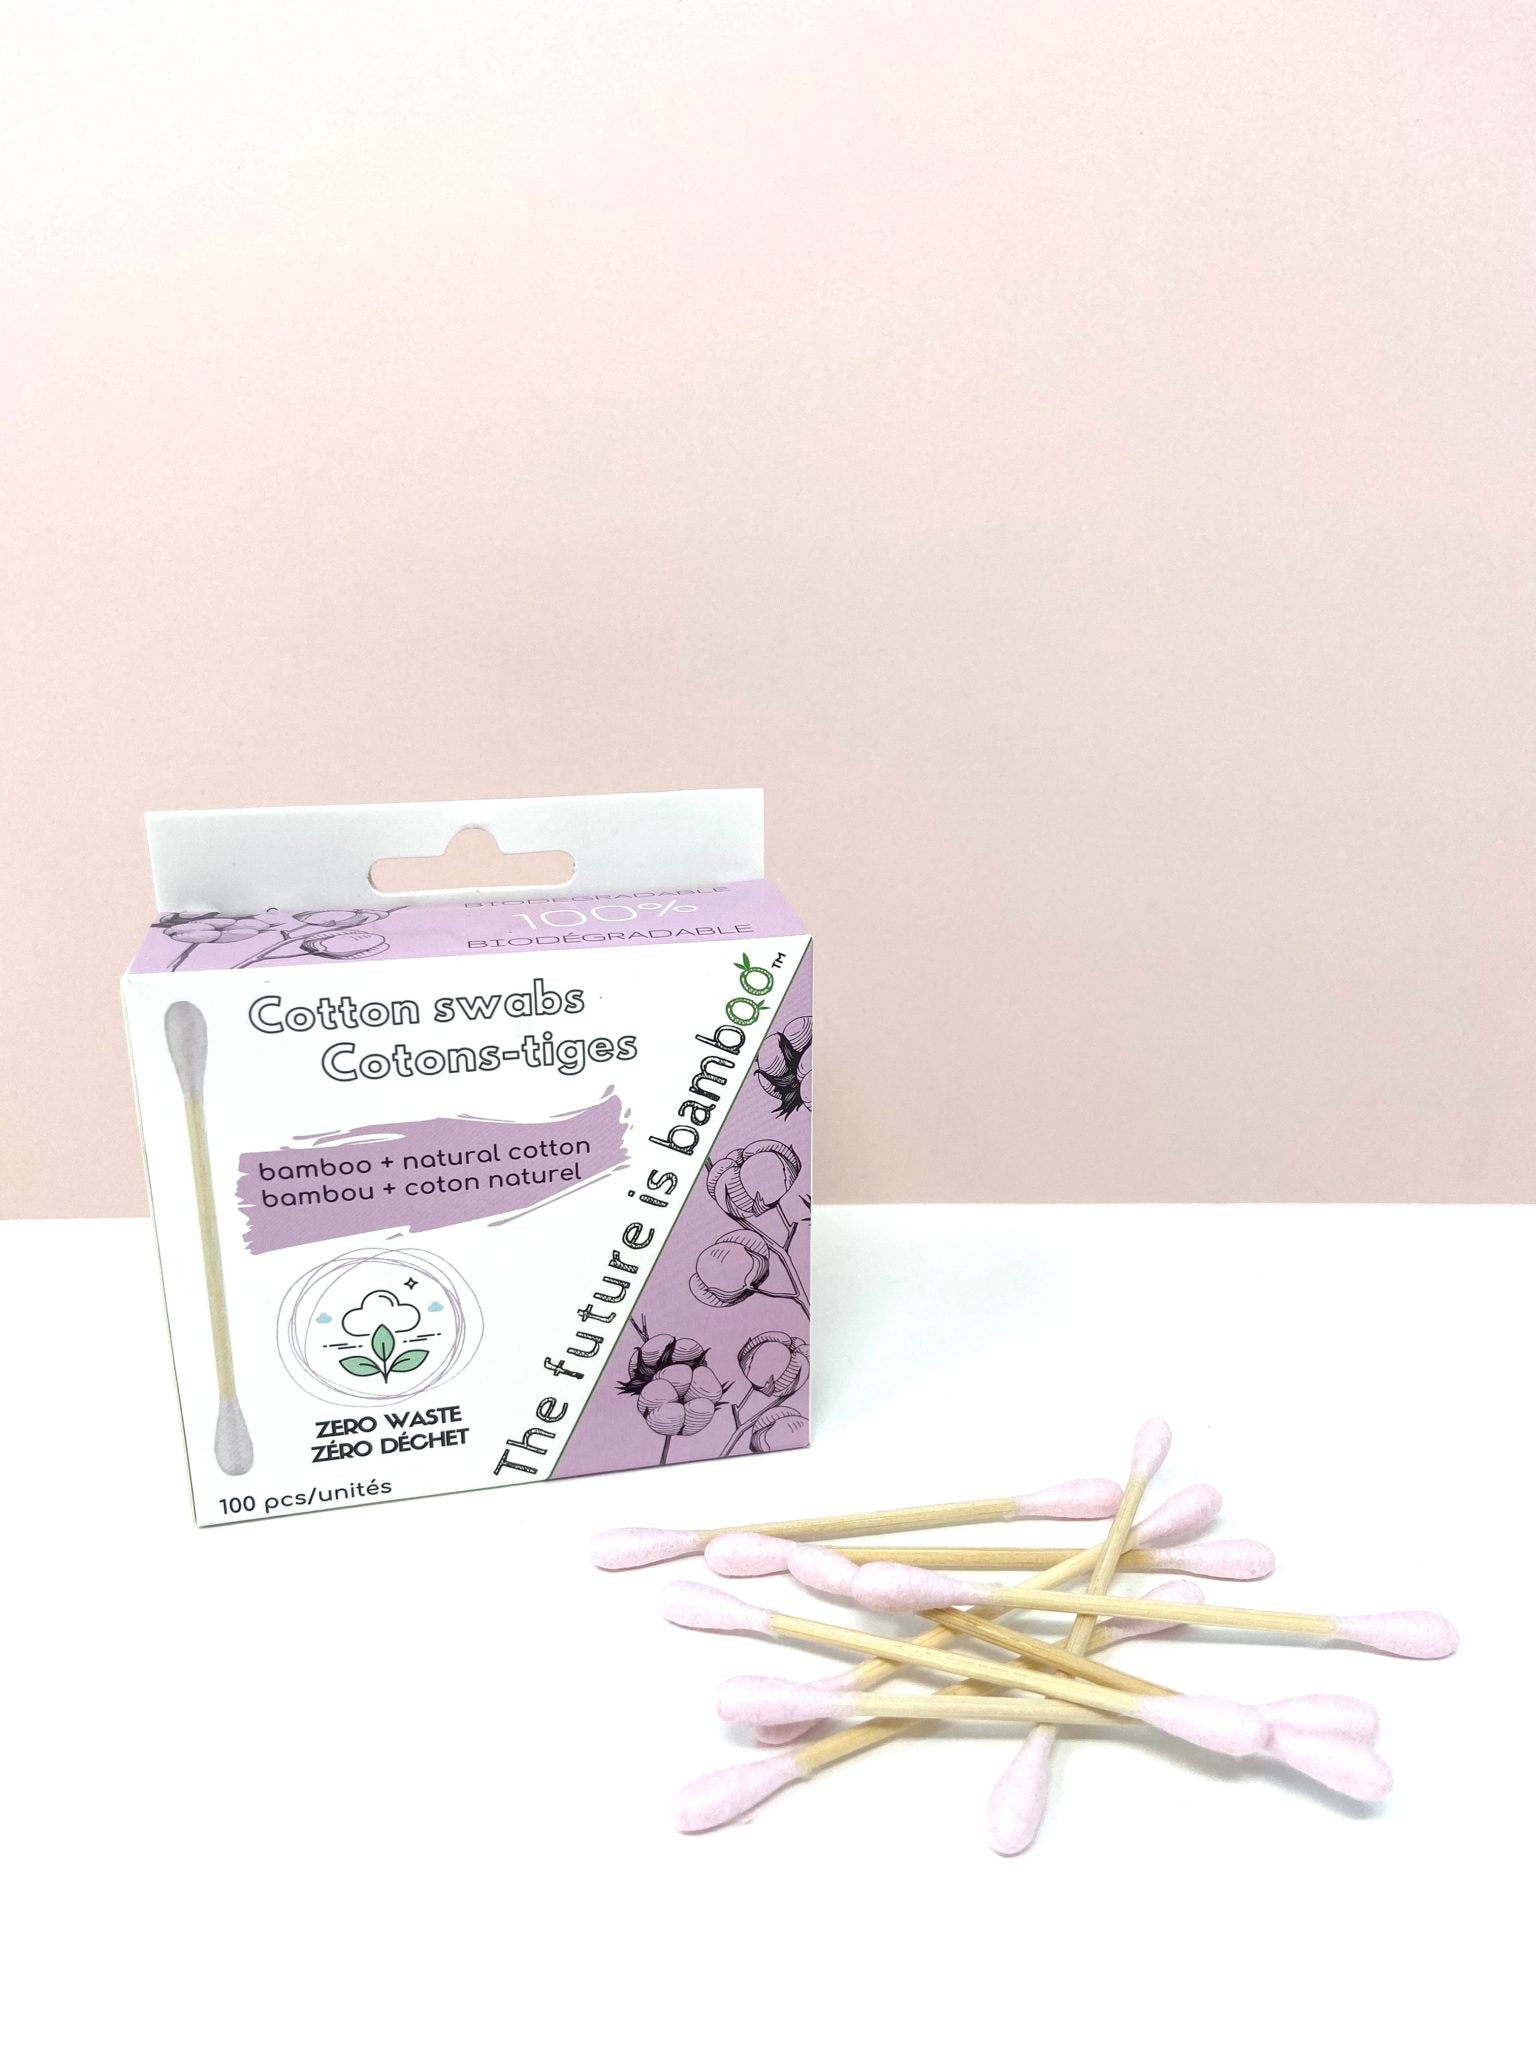 The Future is Bamboo - Bamboo + Organic Cotton Biodegradable Cotton Swabs All Things Being Eco Chilliwack Zero Waste Specialty Store Cruelty Free